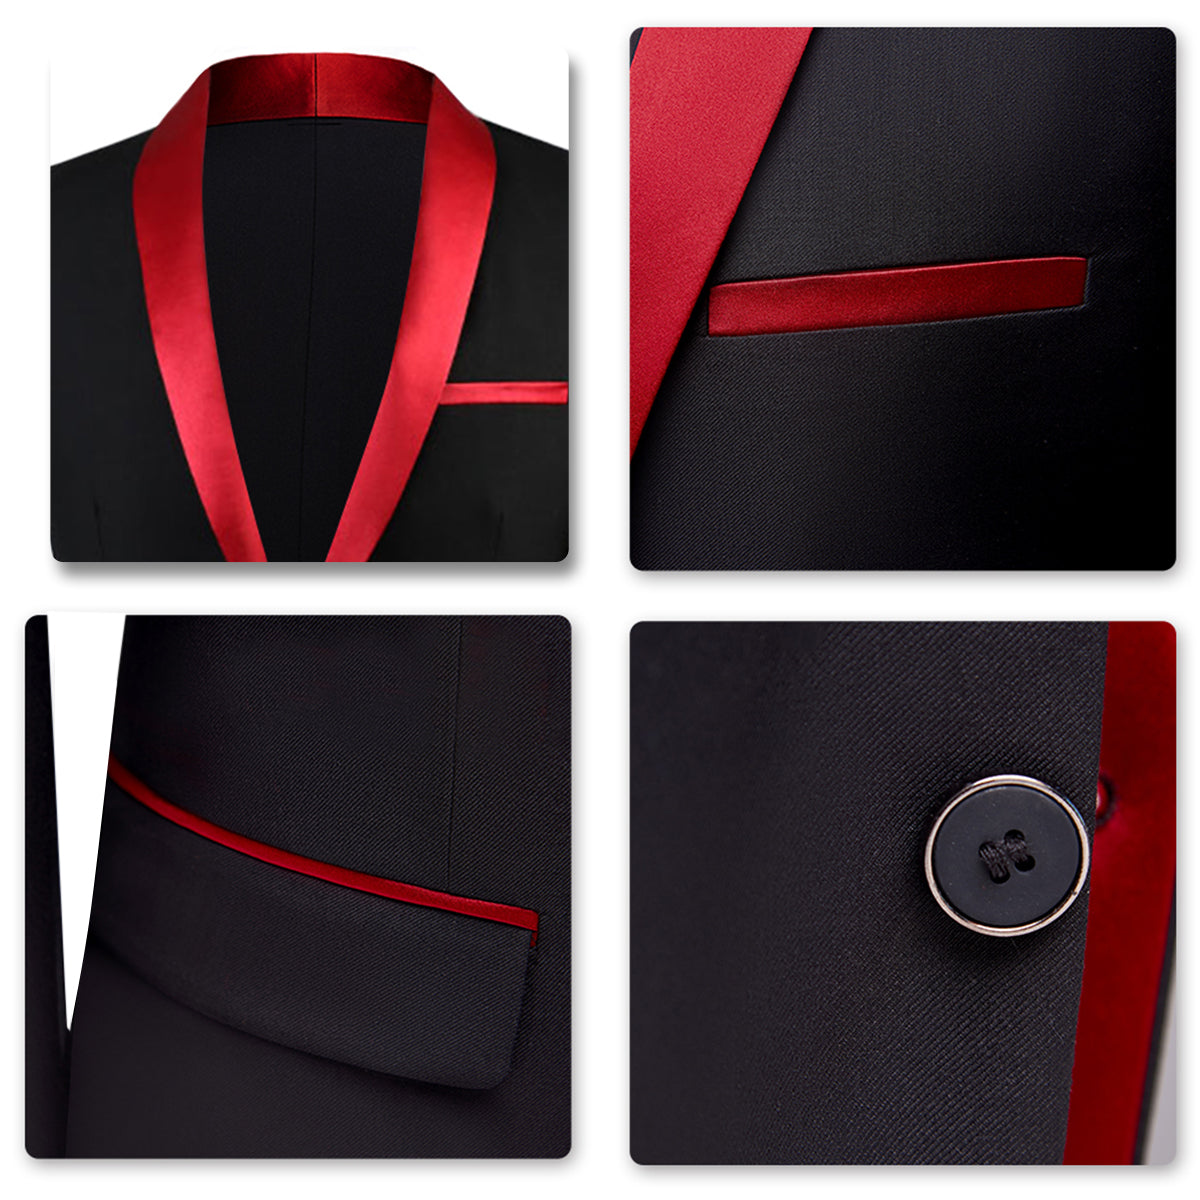 3-Piece Red Contrasting Color Shawl Collar Suit